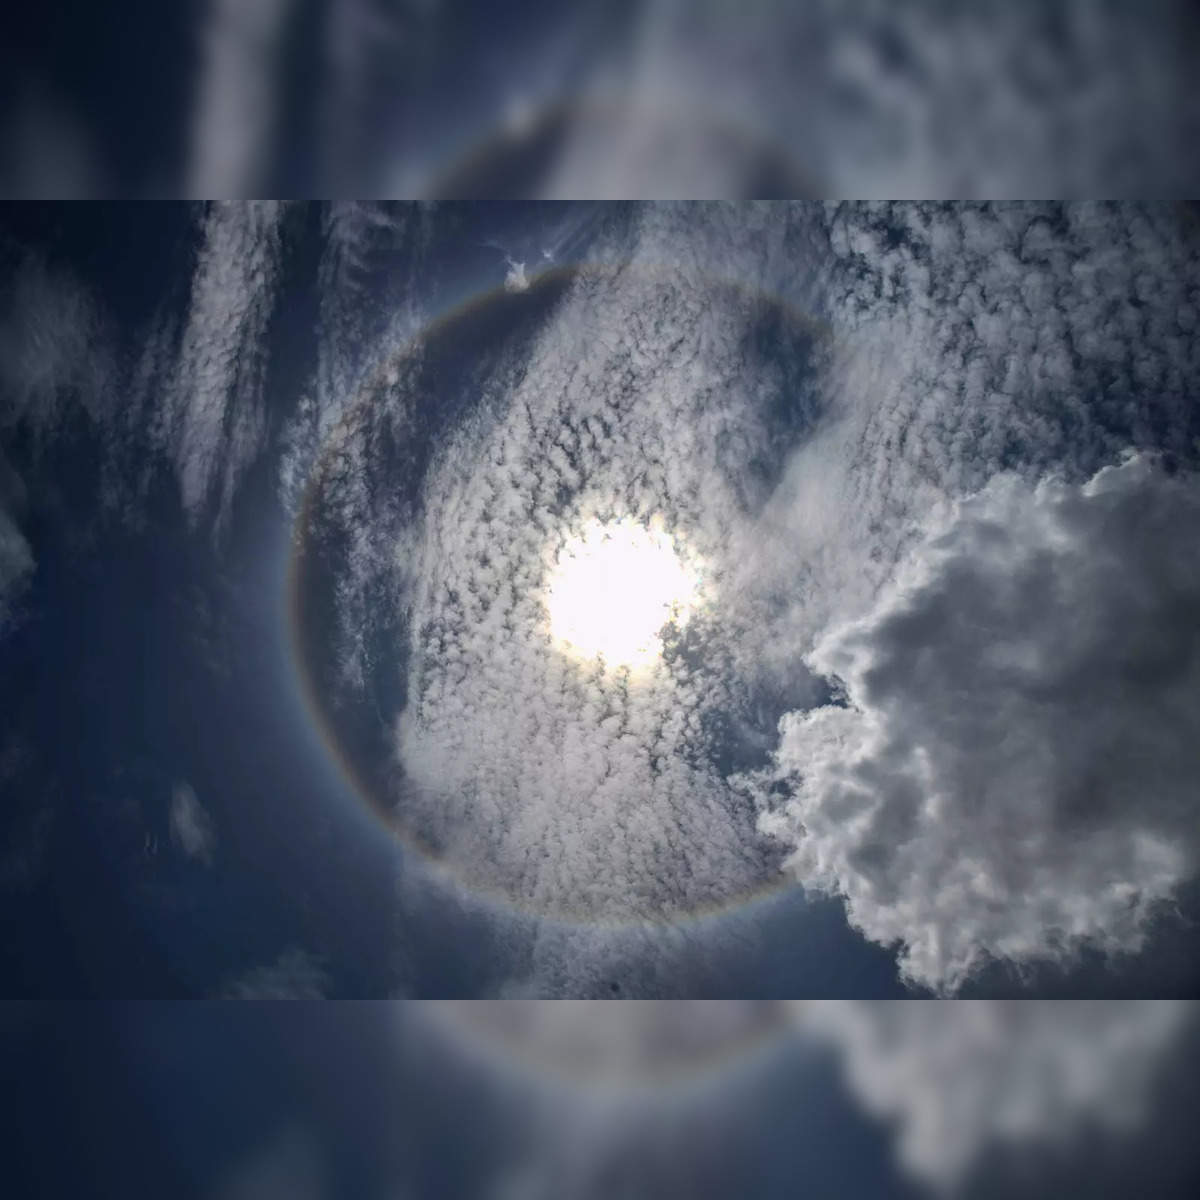 Halo again: Hyderabadis witness another Sun halo, second time this week